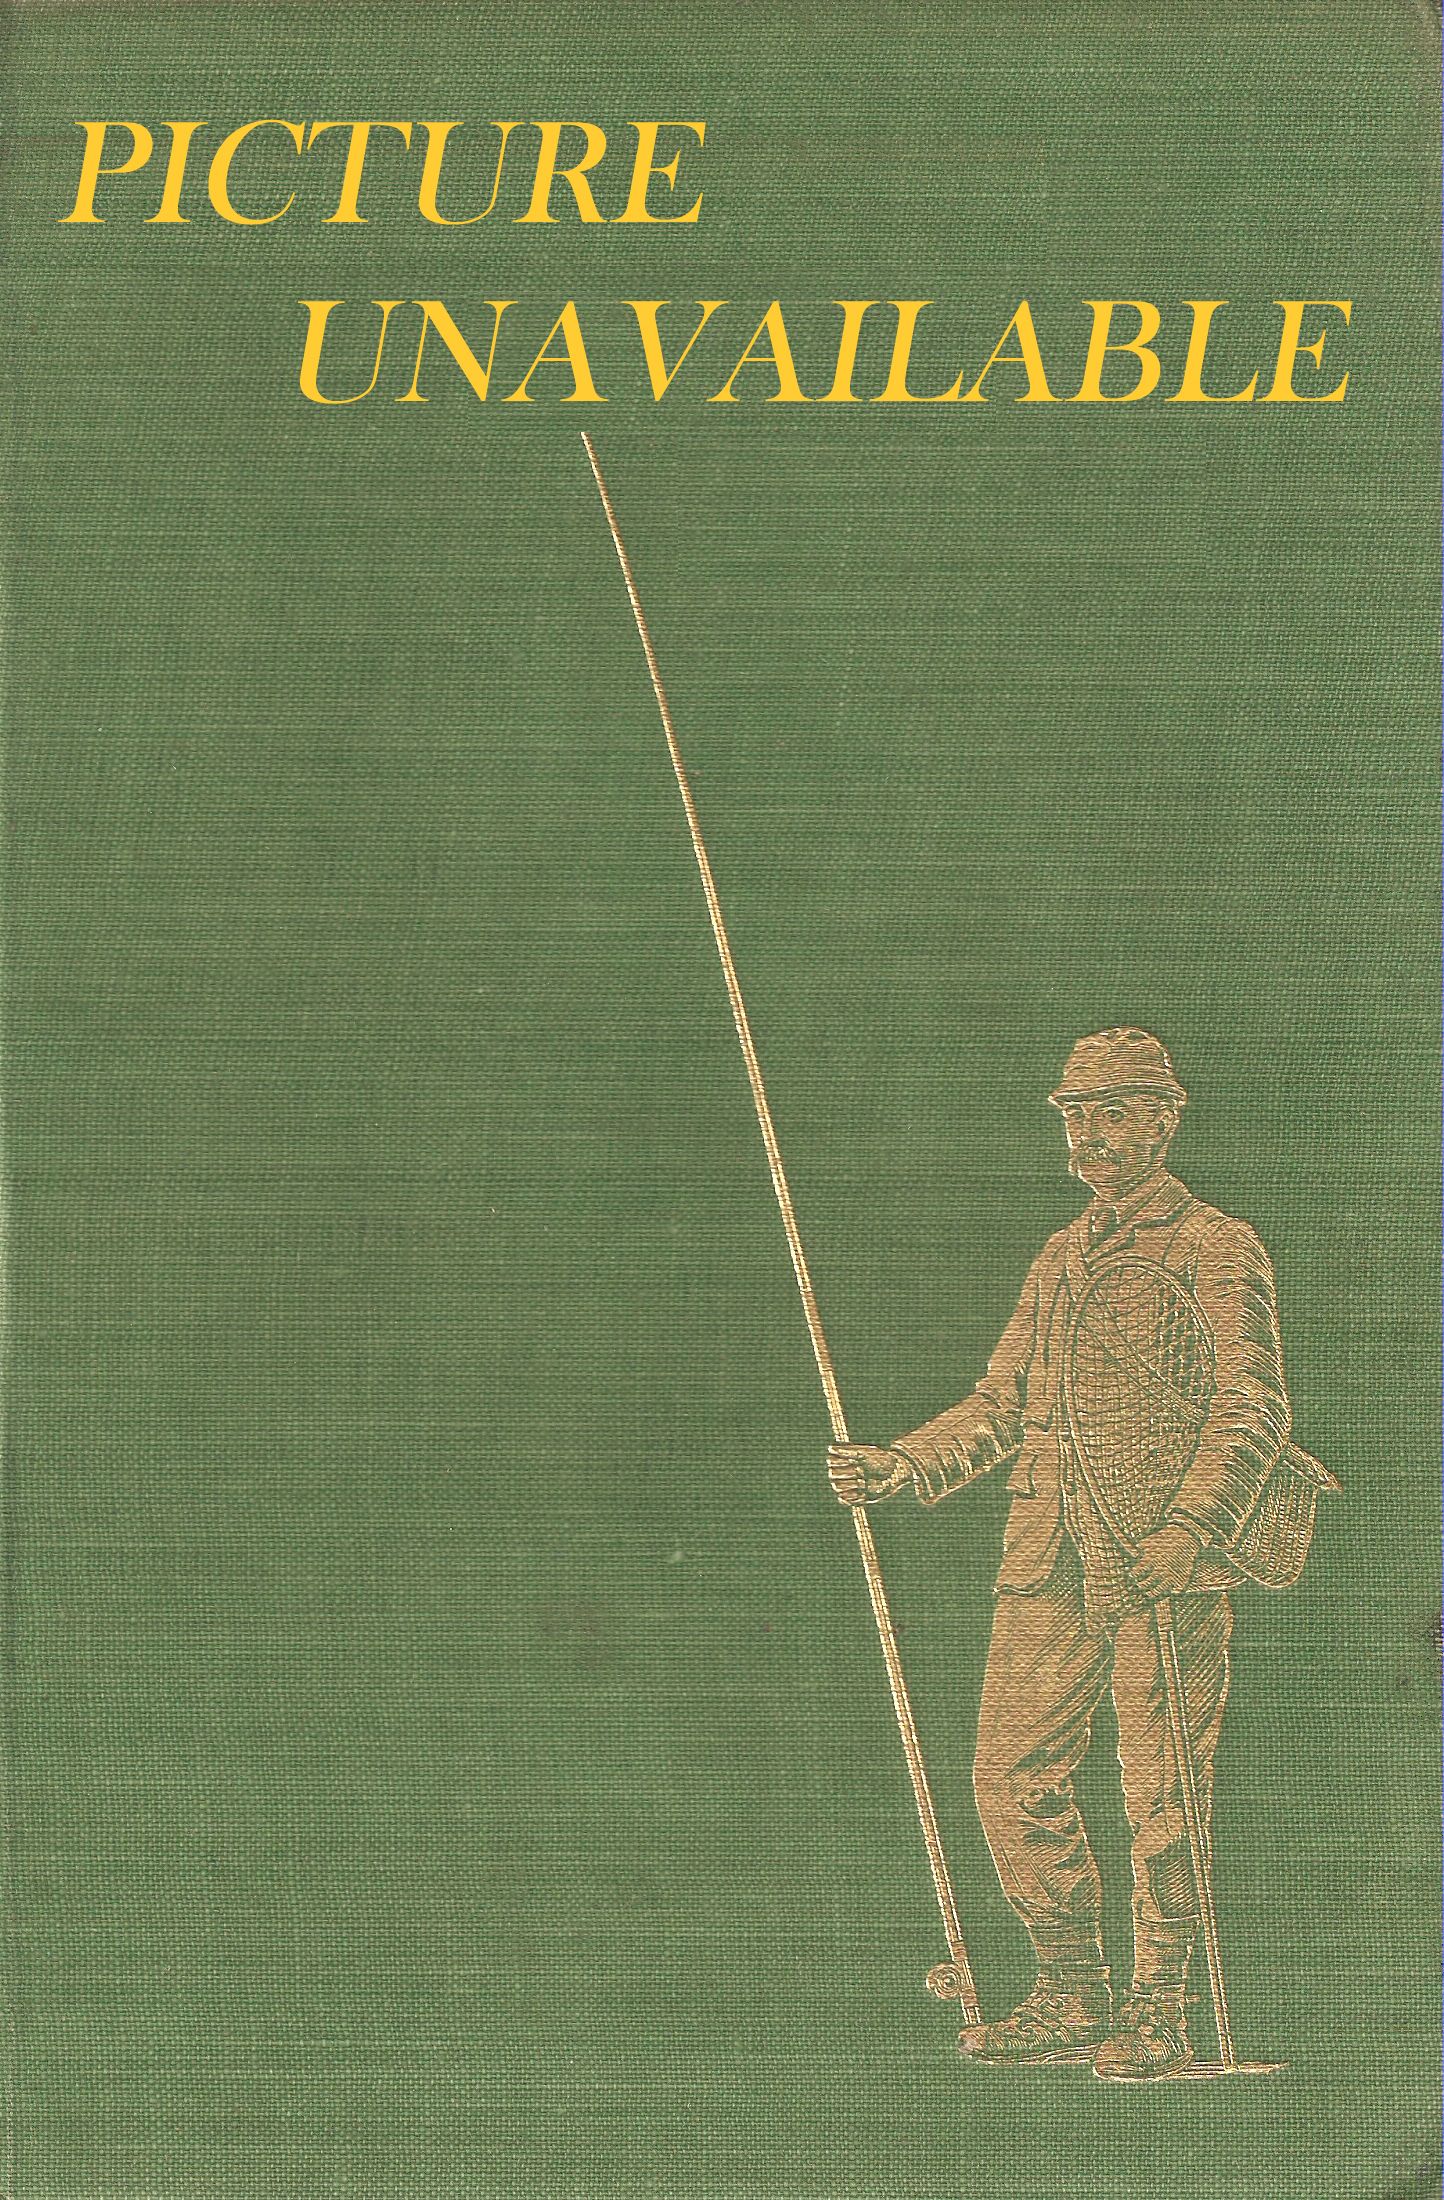 THE COMPLEAT ANGLER. By Izaak Walton and Charles Cotton. Edited with an  introduction by Richard Le Gallienne. Illustrated by Edmund H. New.